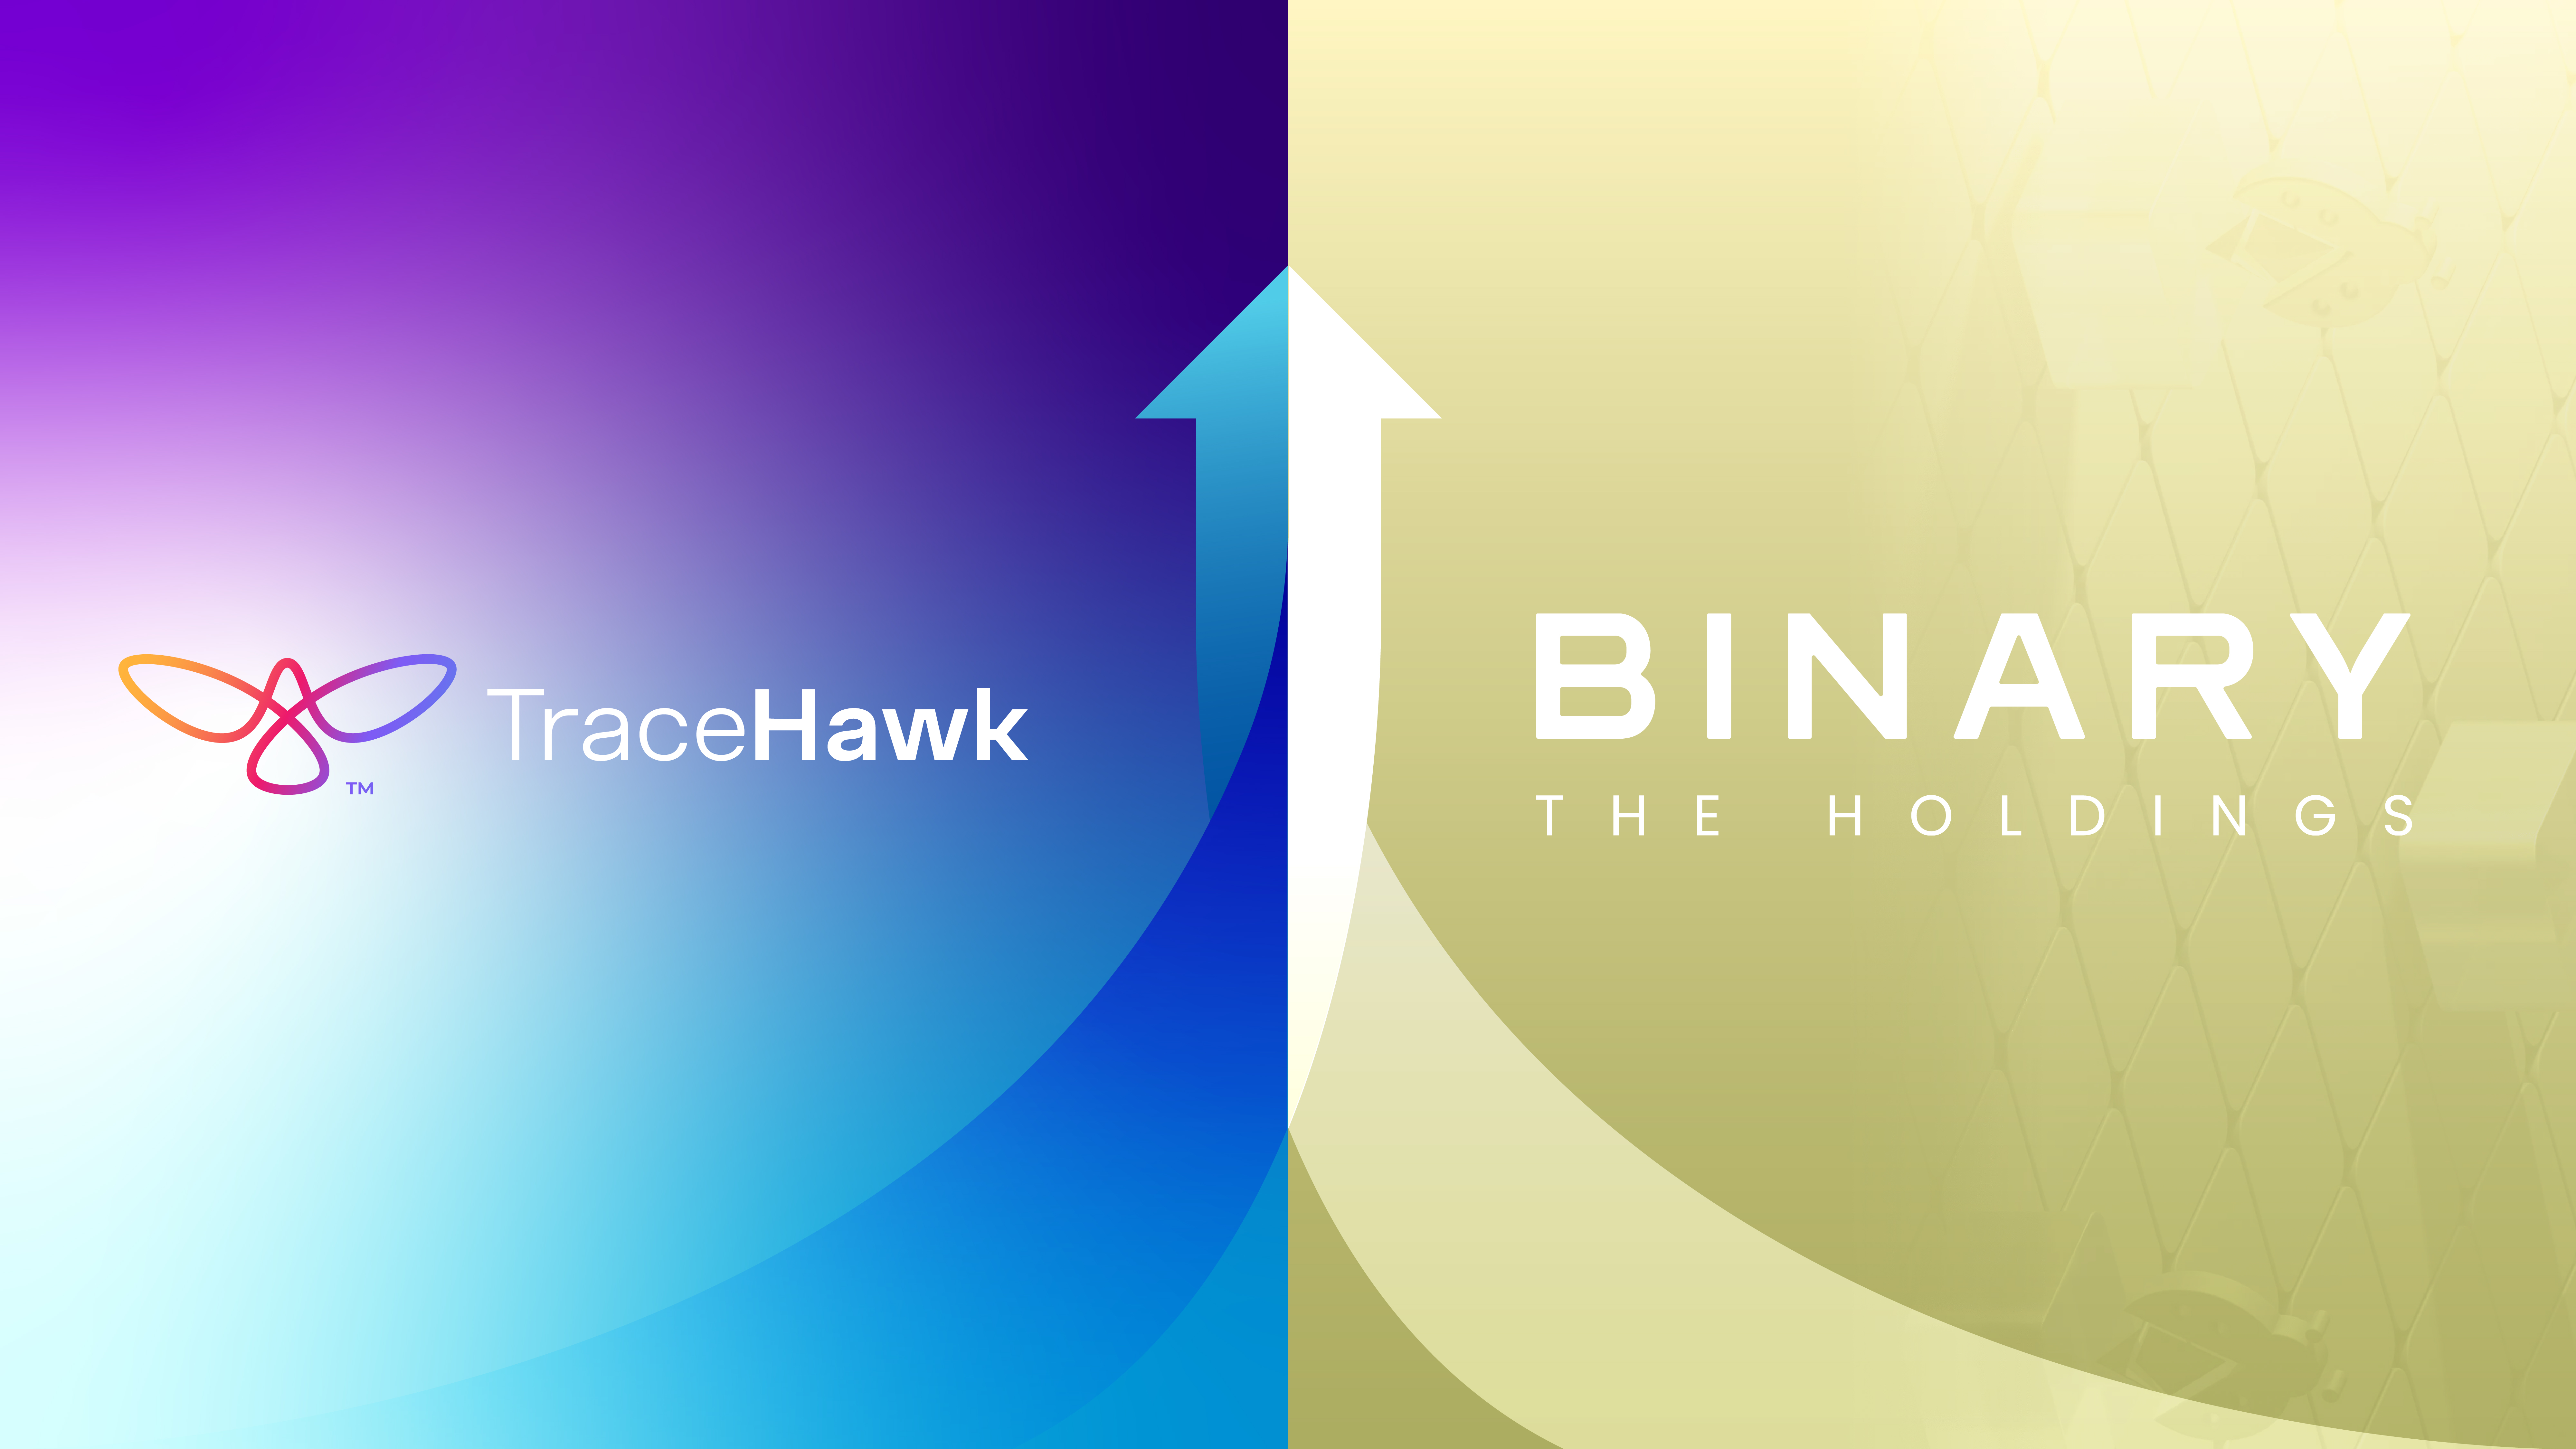 The Binary Holdings L2 Scales with TraceHawk Block Explorer